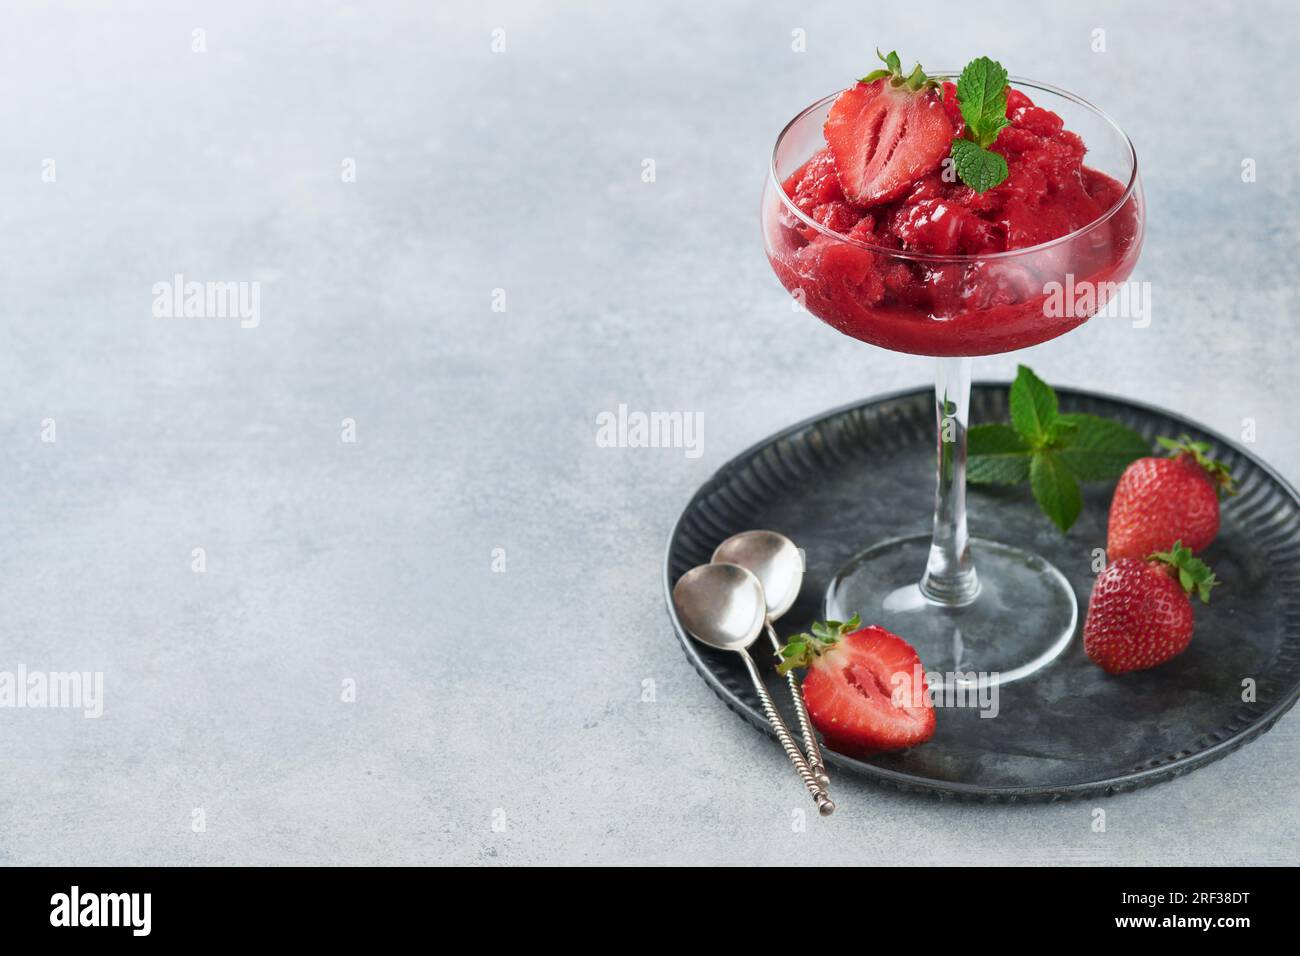 https://c8.alamy.com/comp/2RF38DT/strawberry-granita-or-fresh-berry-sorbet-in-glass-on-old-grey-table-background-texture-of-ice-cream-or-sorbet-ice-cream-with-strawberry-and-mint-s-2RF38DT.jpg